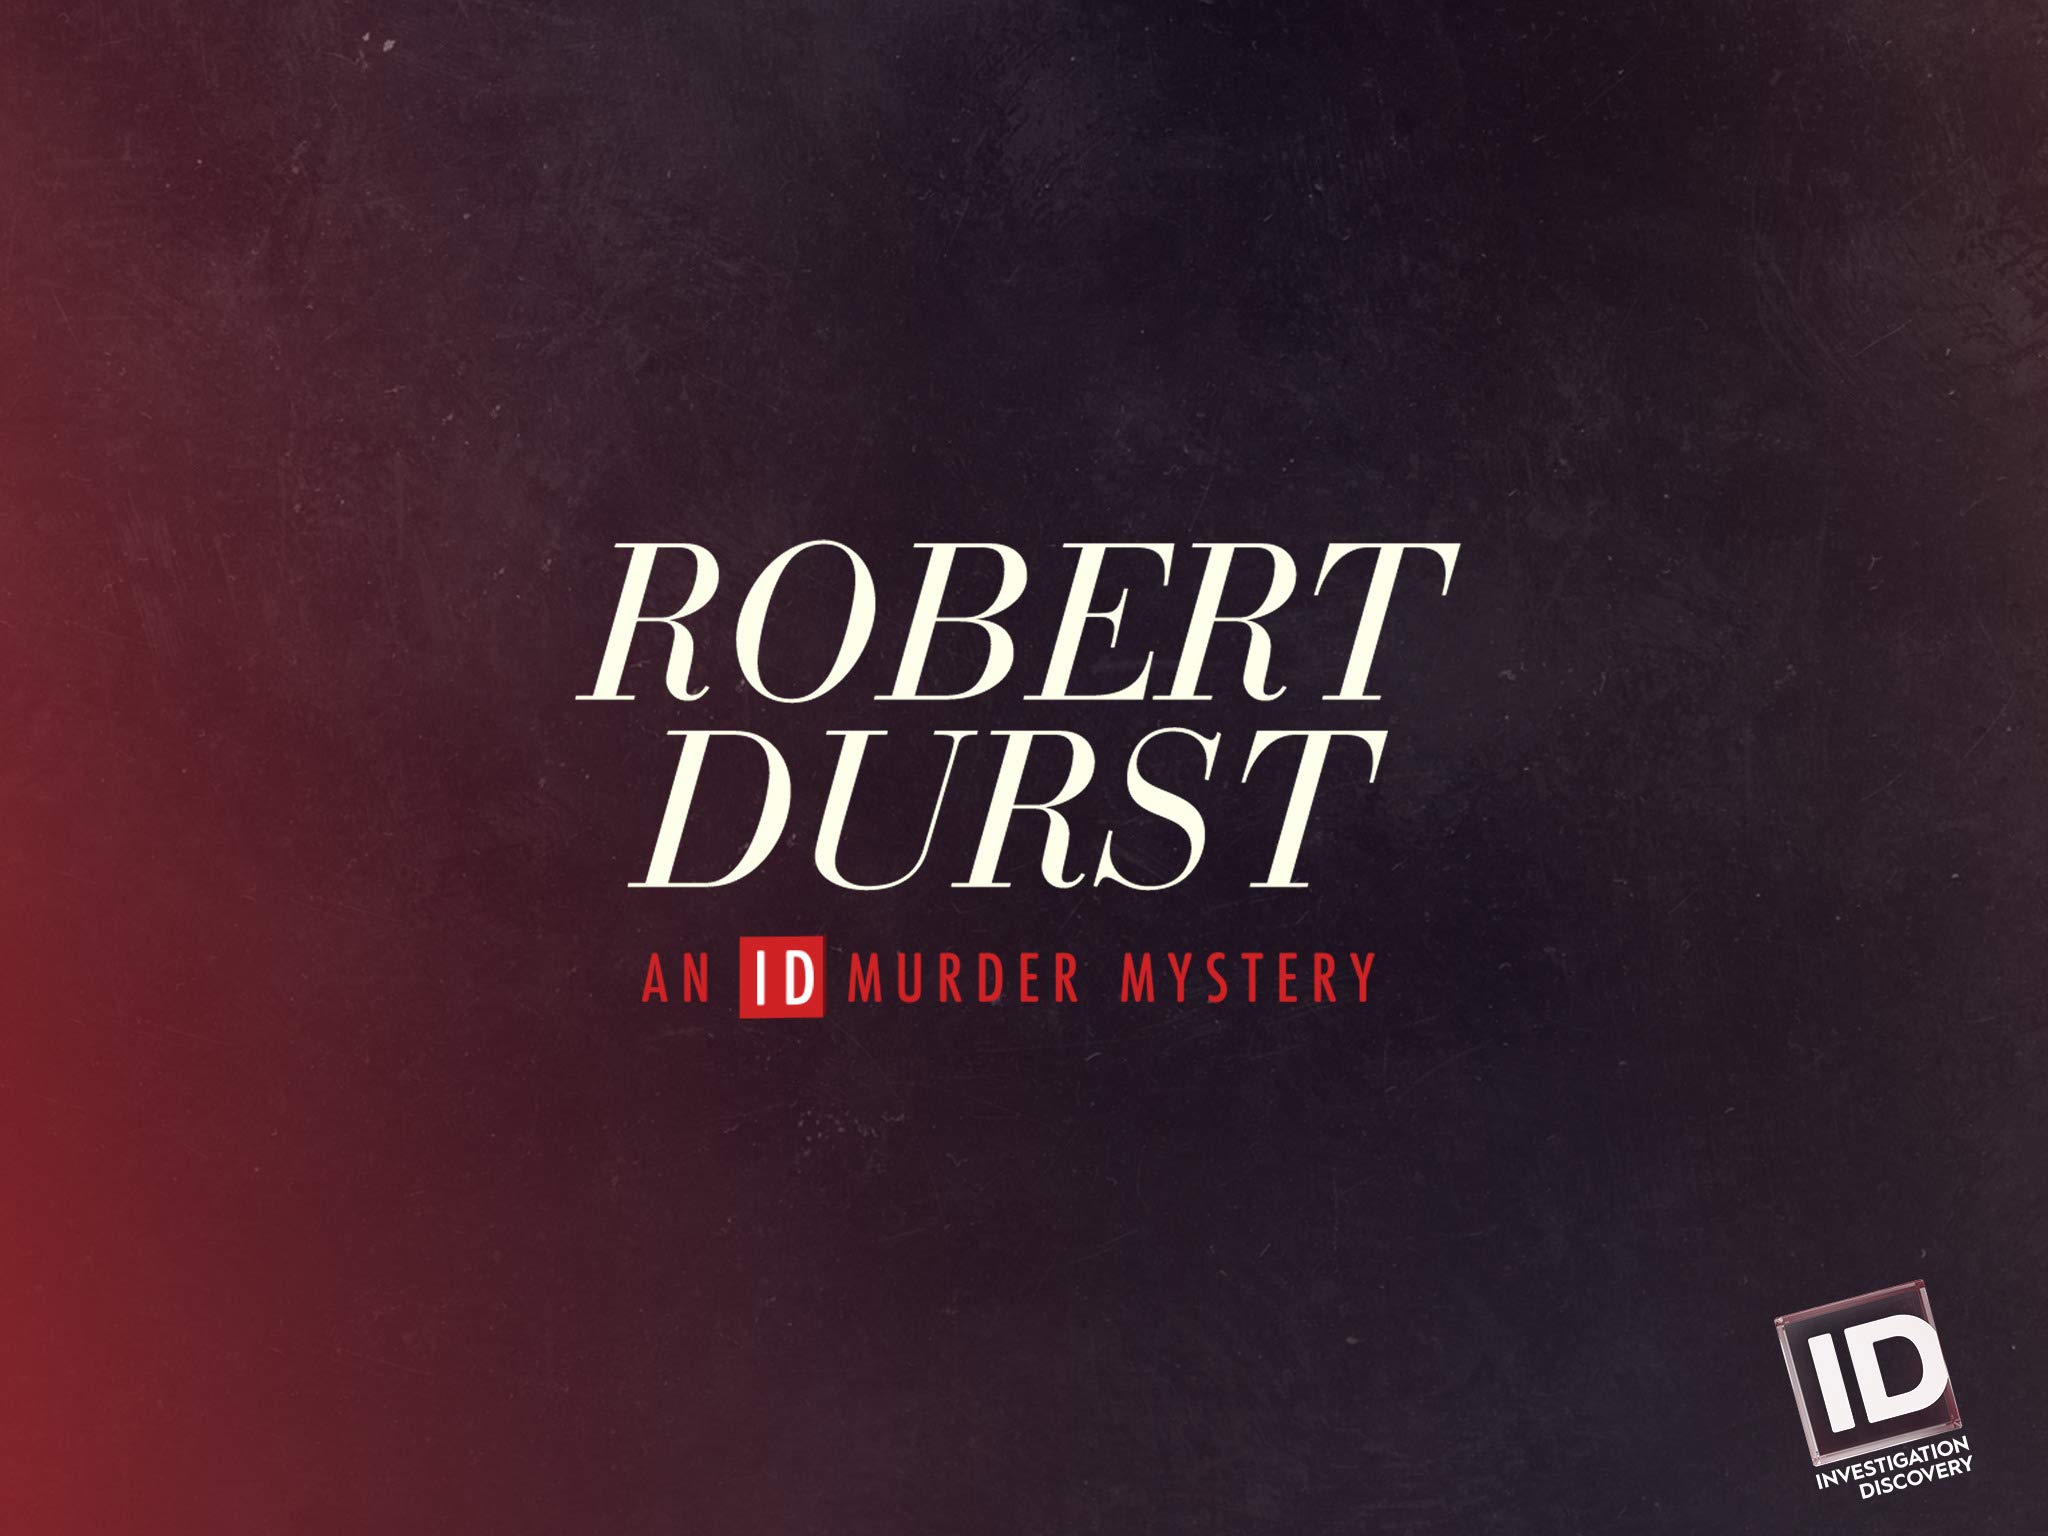 TV ratings for Robert Durst: An Id Murder Mystery in Norway. investigation discovery TV series